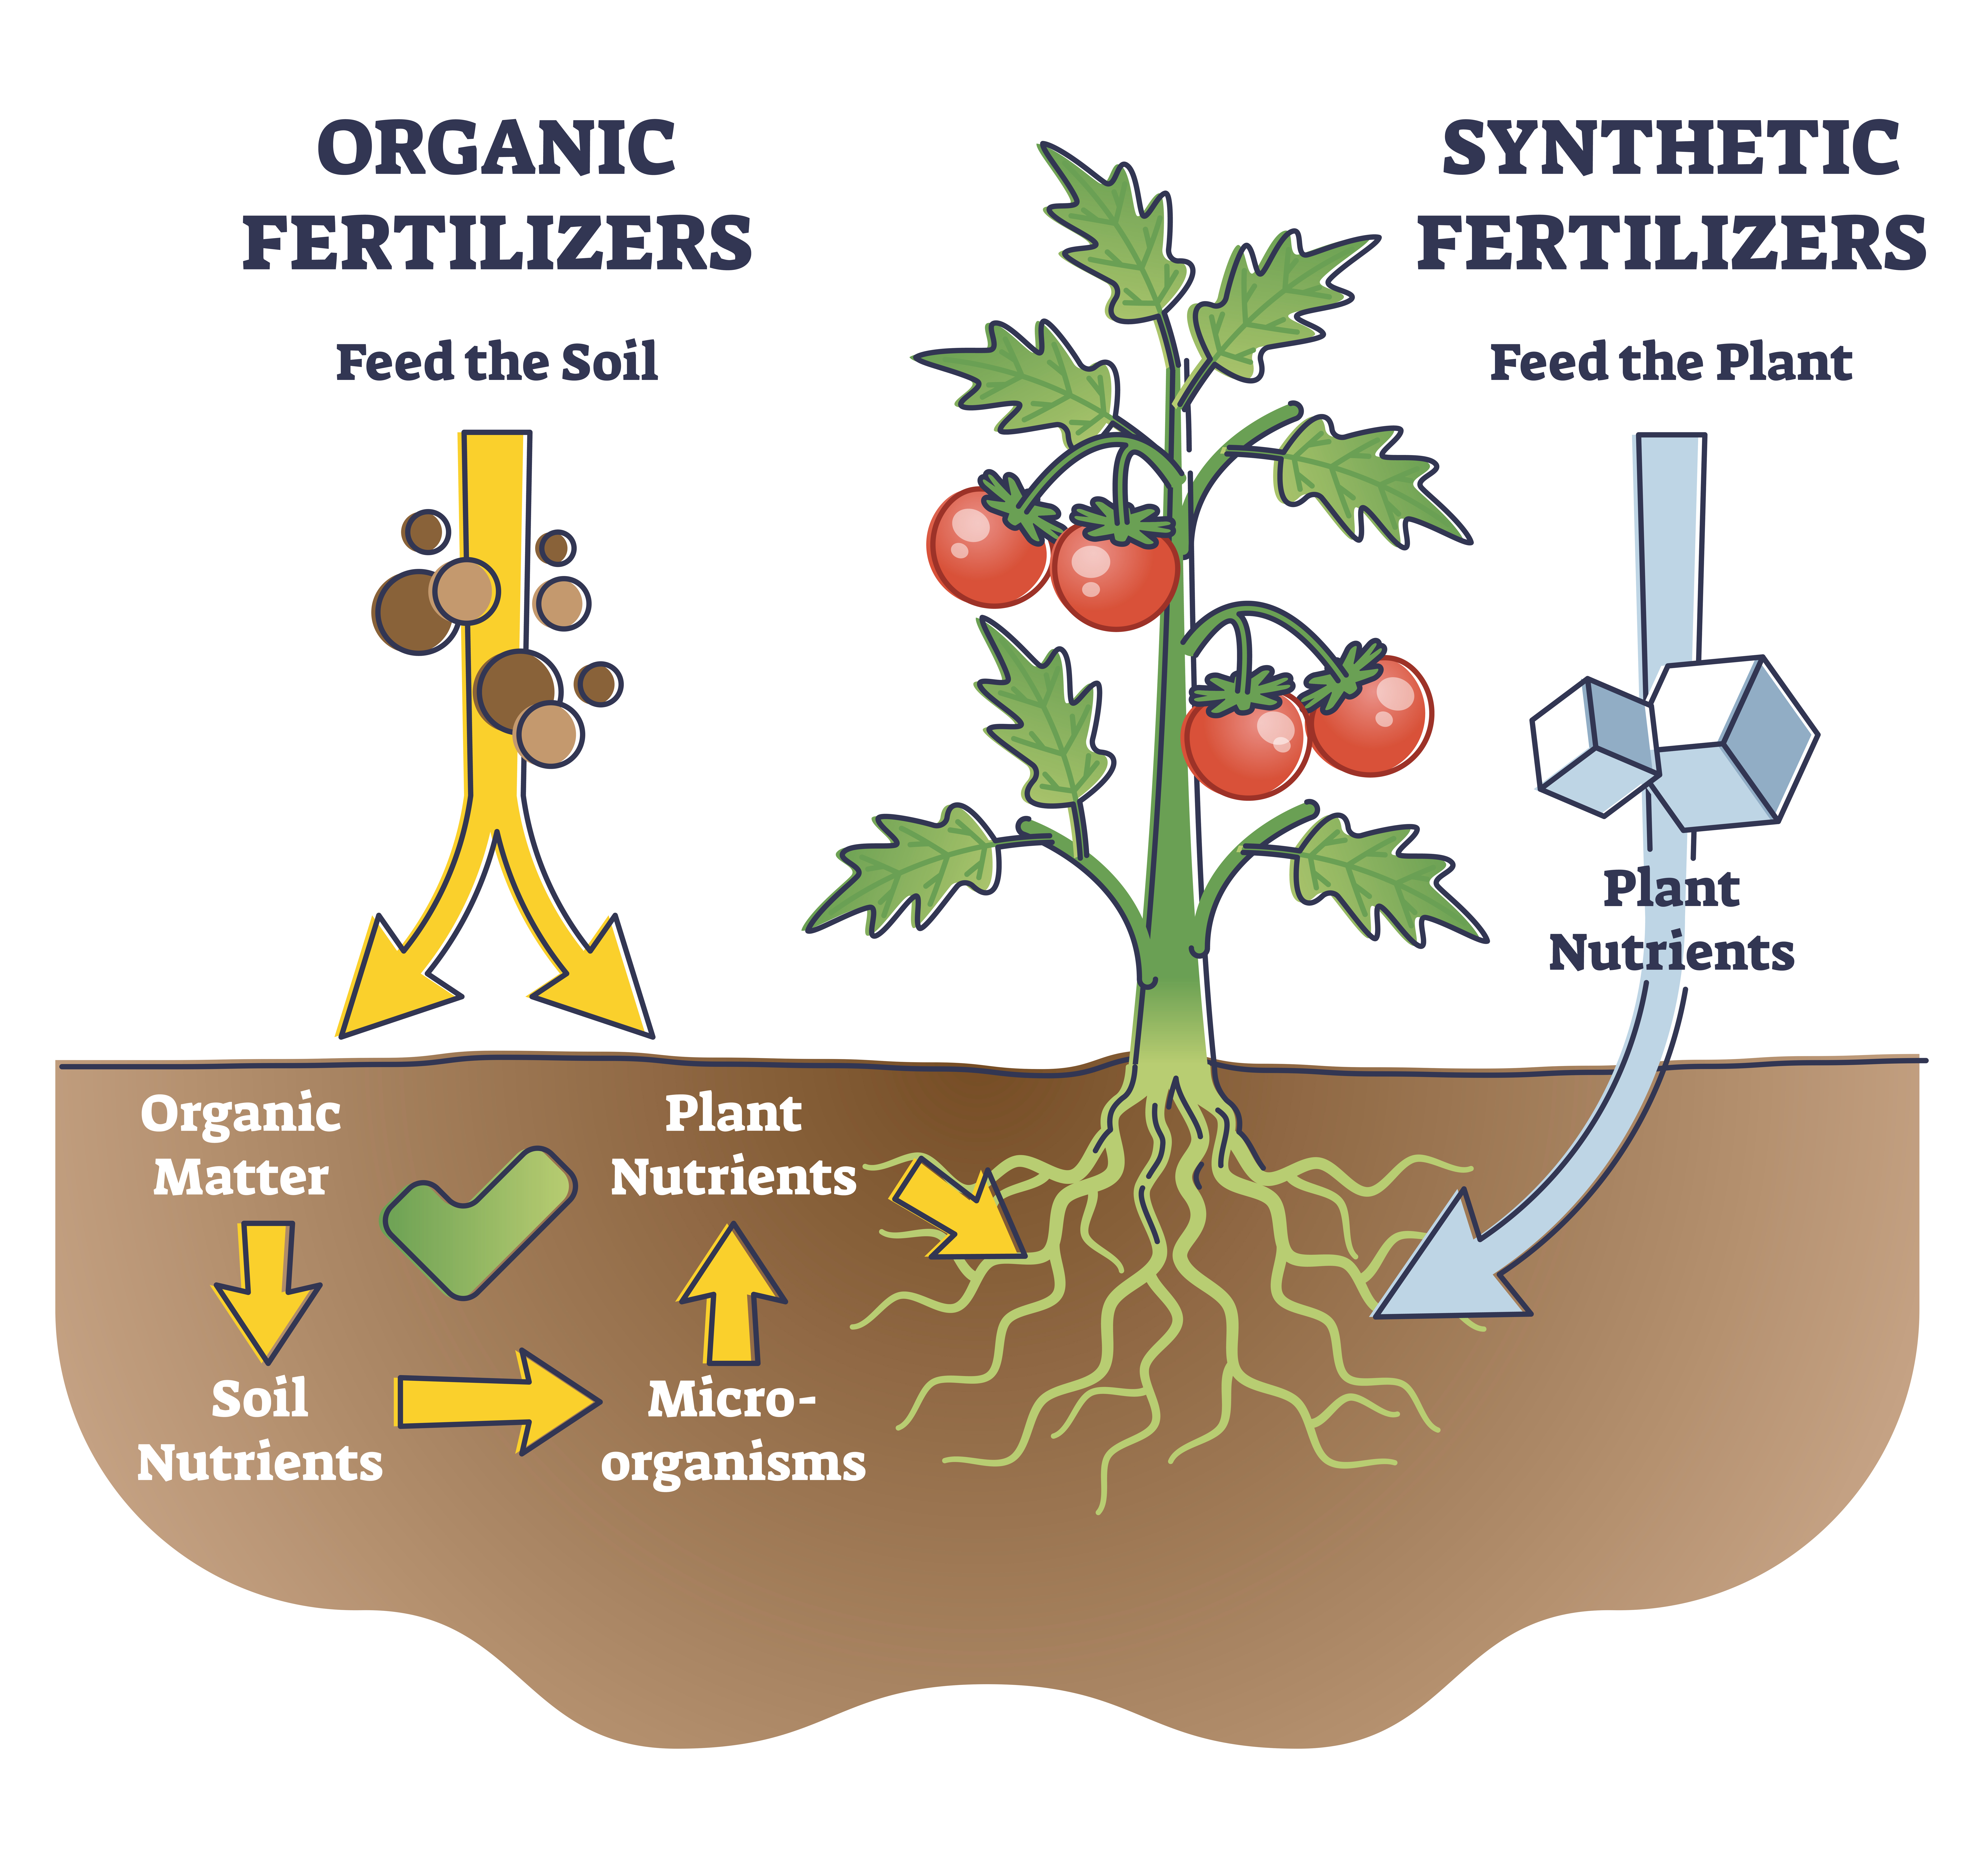 Organic and synthetic fertilizers